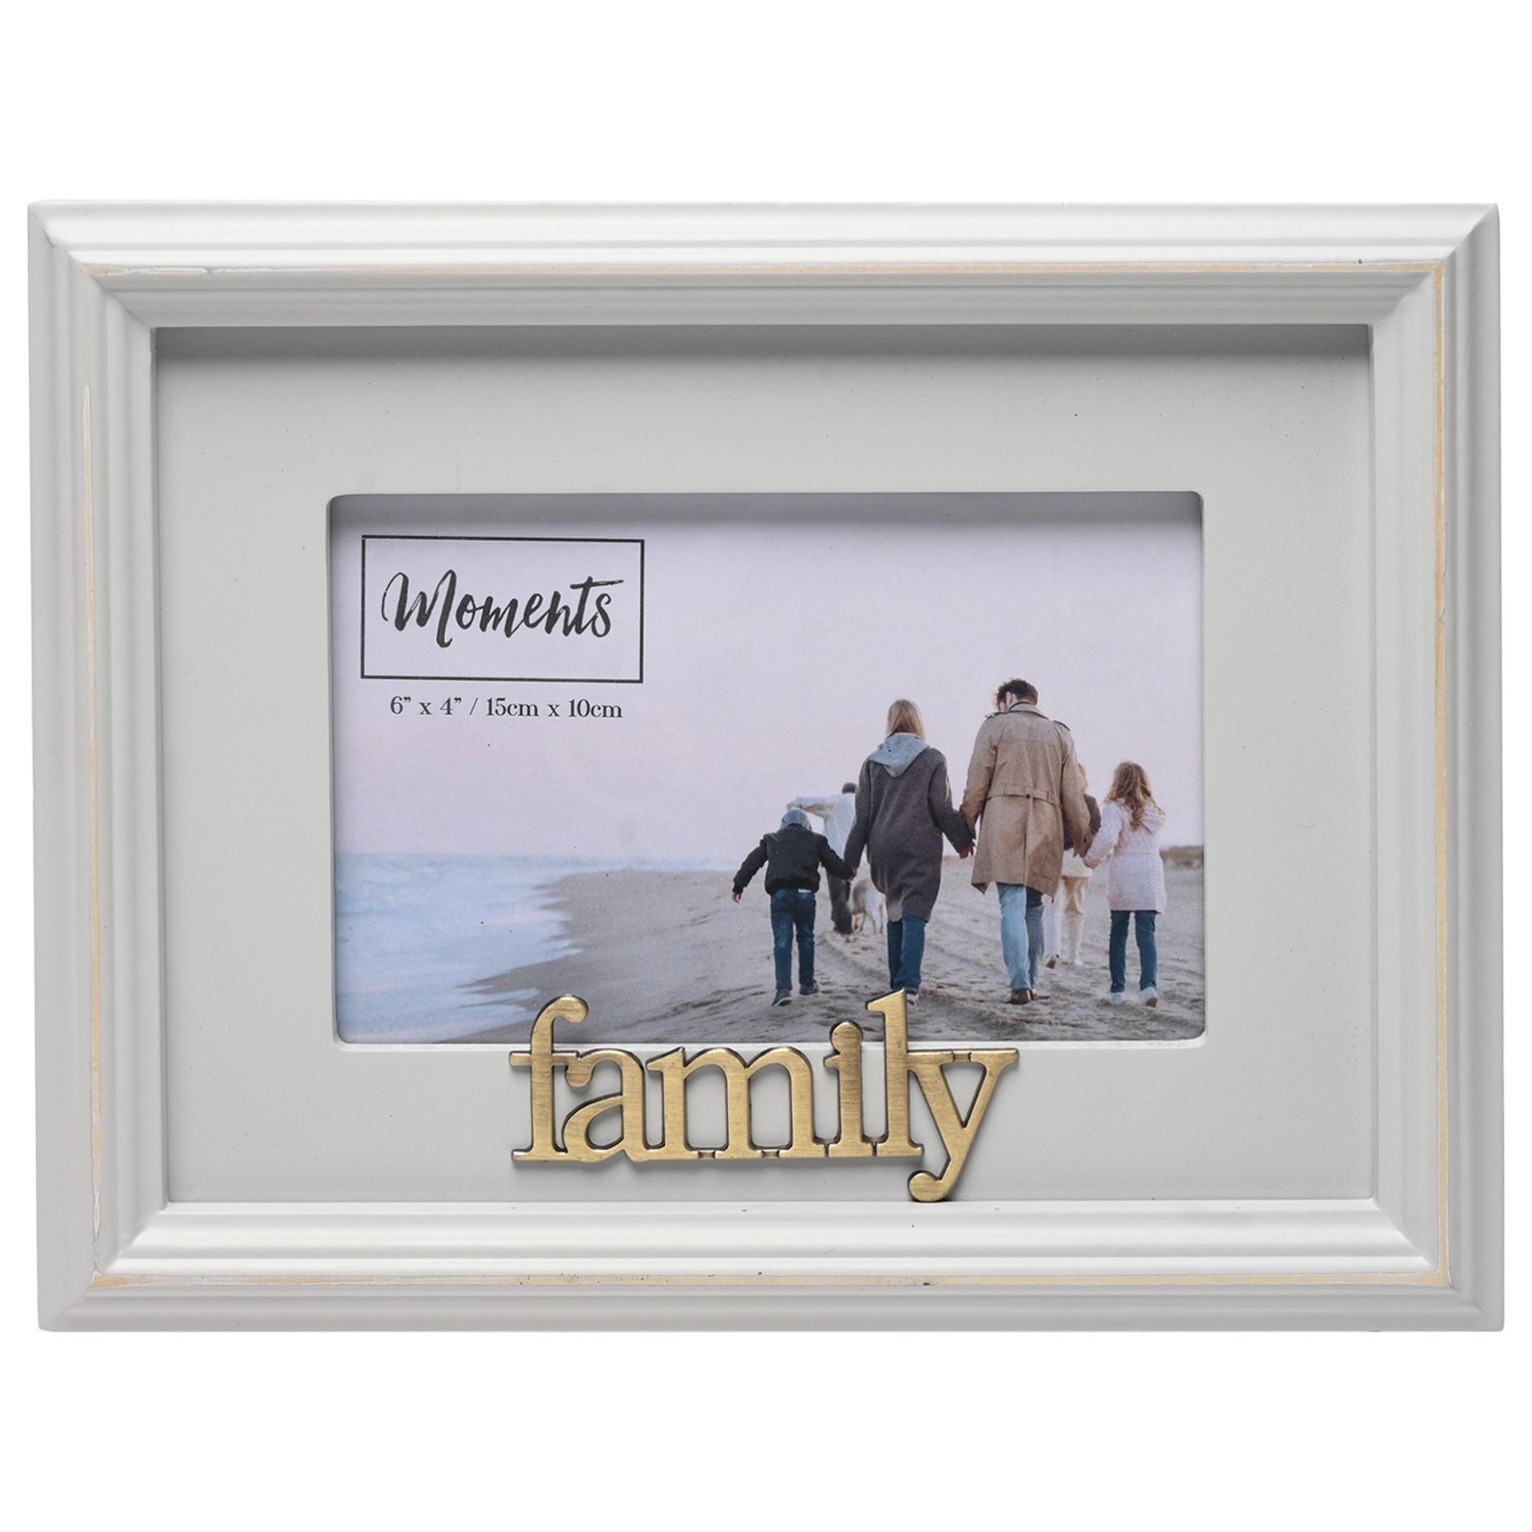 Moments Family Wooden Photo Frame - Taupe - 18x23cm - image 1